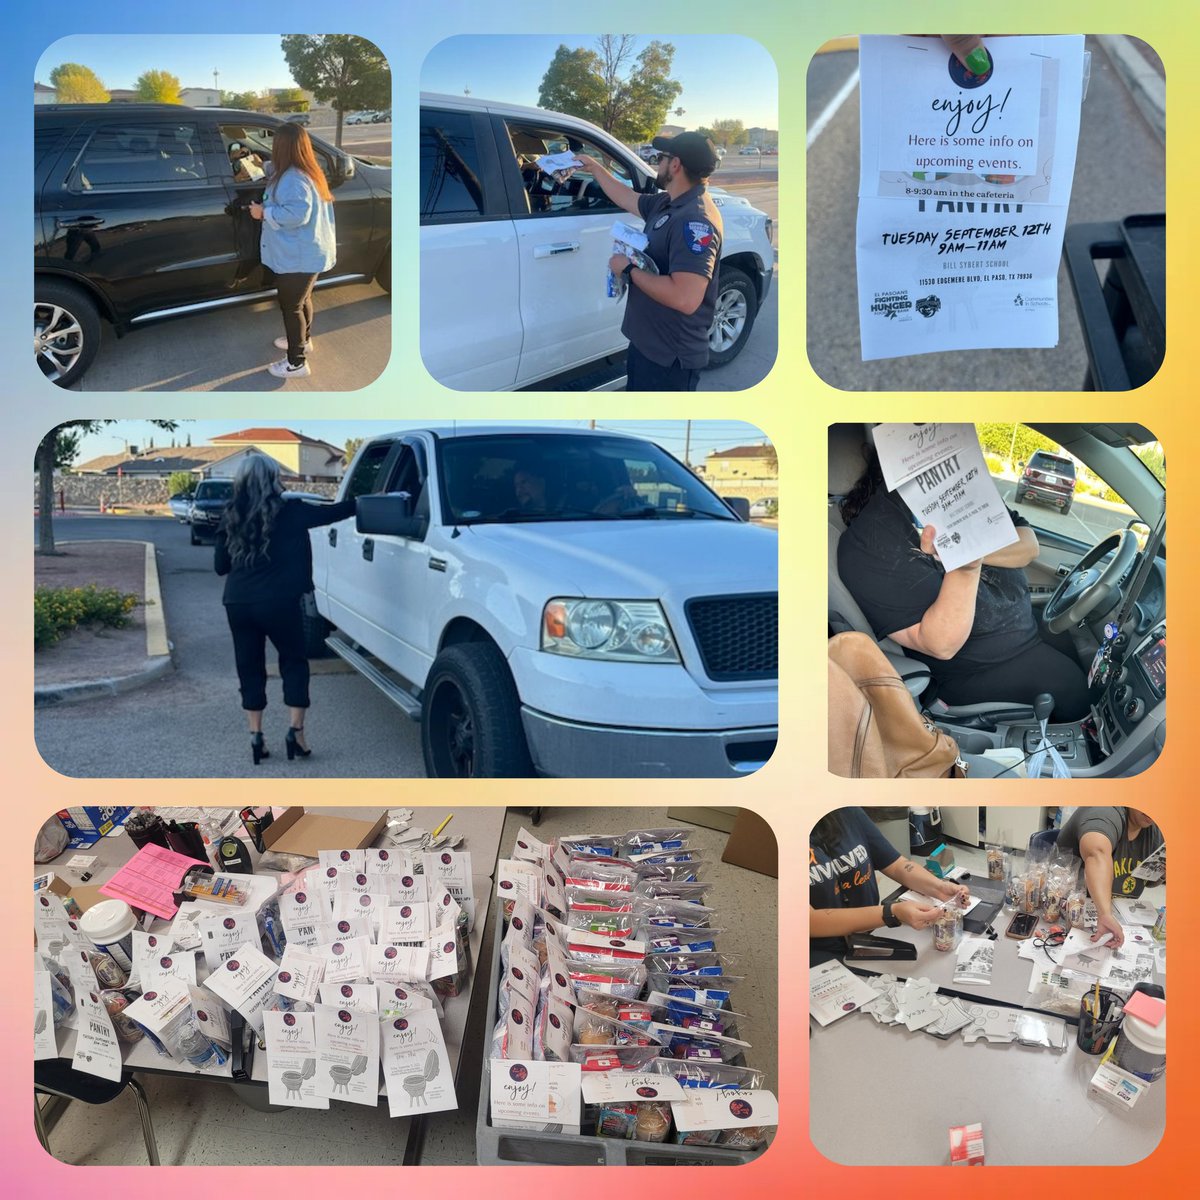 Breakfast on the go success! It was great to greet our amazing scorpion parents! See you all at these great events. Thank you to the volunteers who helped me build these tasty bags. #ScorpionCountry #TeamSISD @BSybert_Prek8 @DianalopCIS_BSS @Vbueno_BSS @MsAzcarate_bss